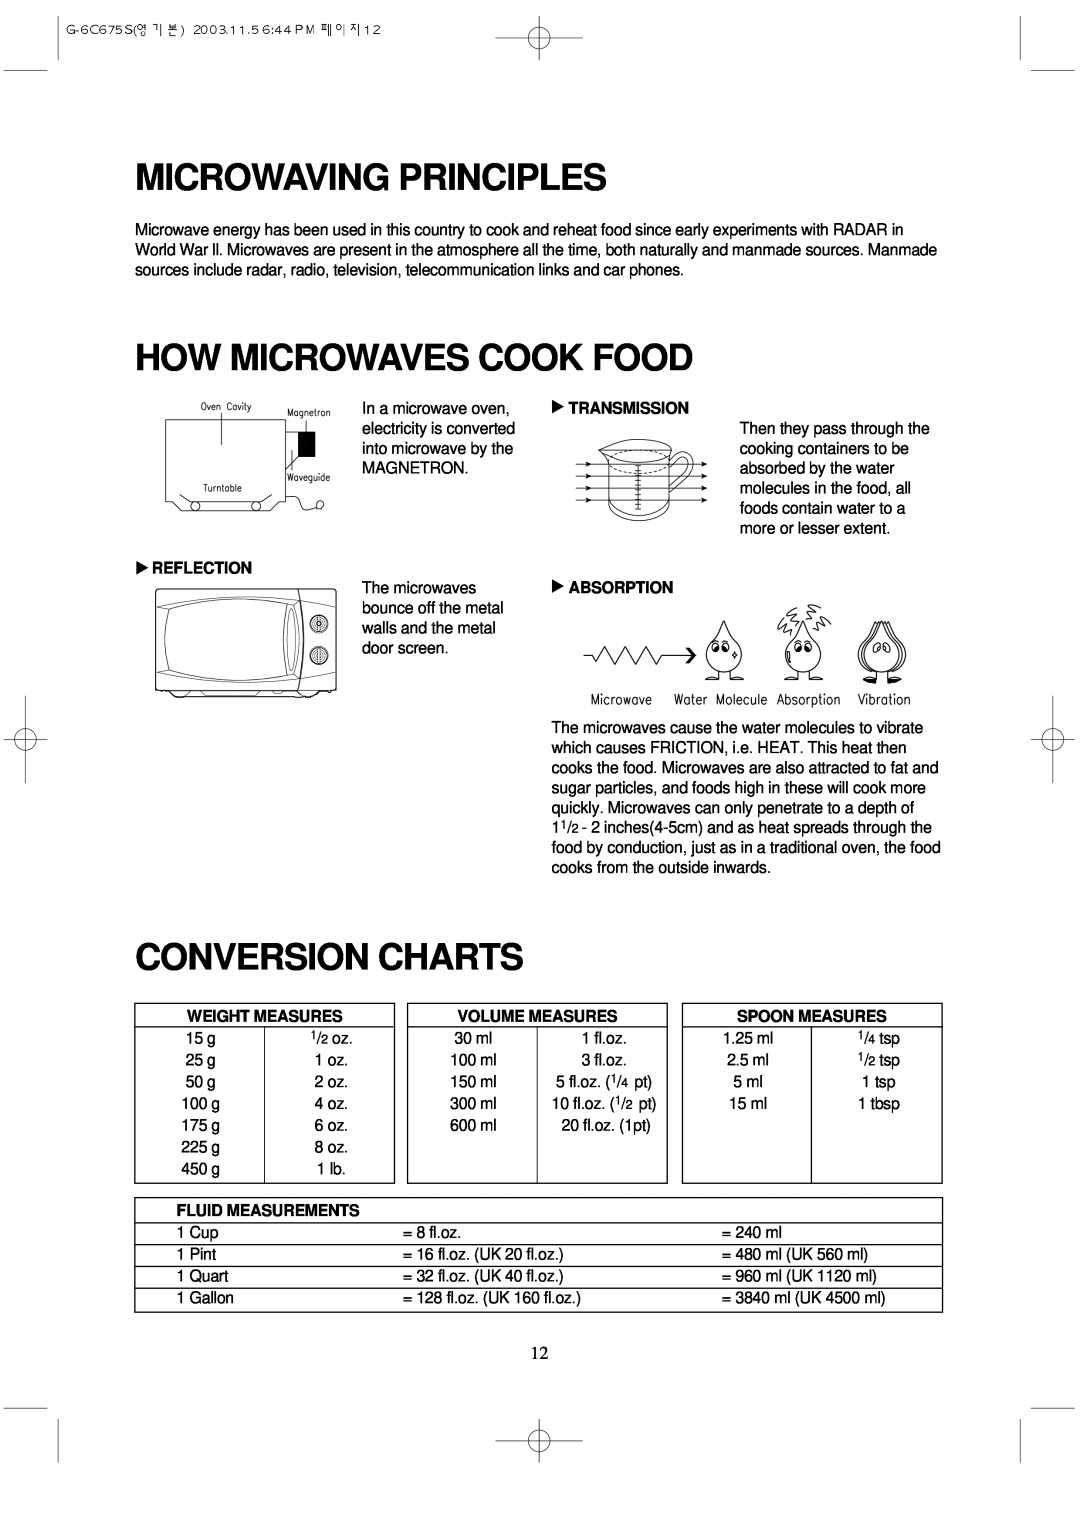 Daewoo KOG-3C675S Microwaving Principles, How Microwaves Cook Food, Conversion Charts, Reflection, Transmission Absorption 